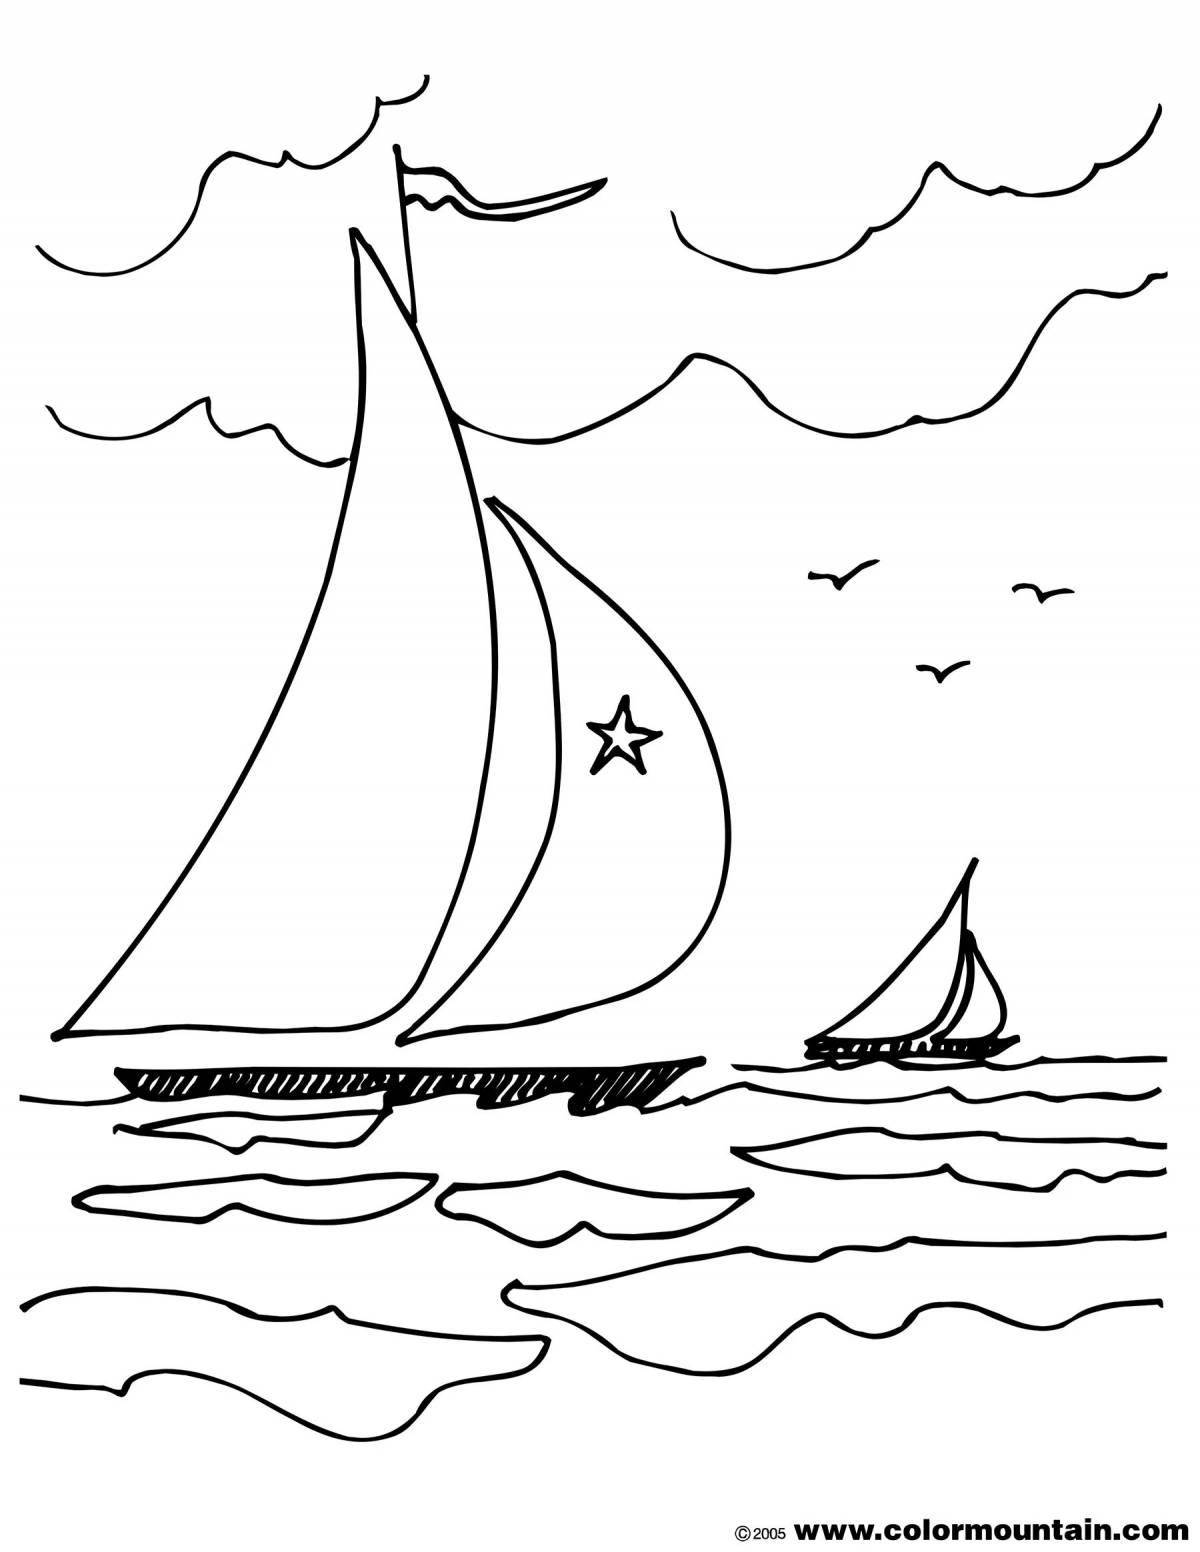 Exquisite marine coloring book for kids